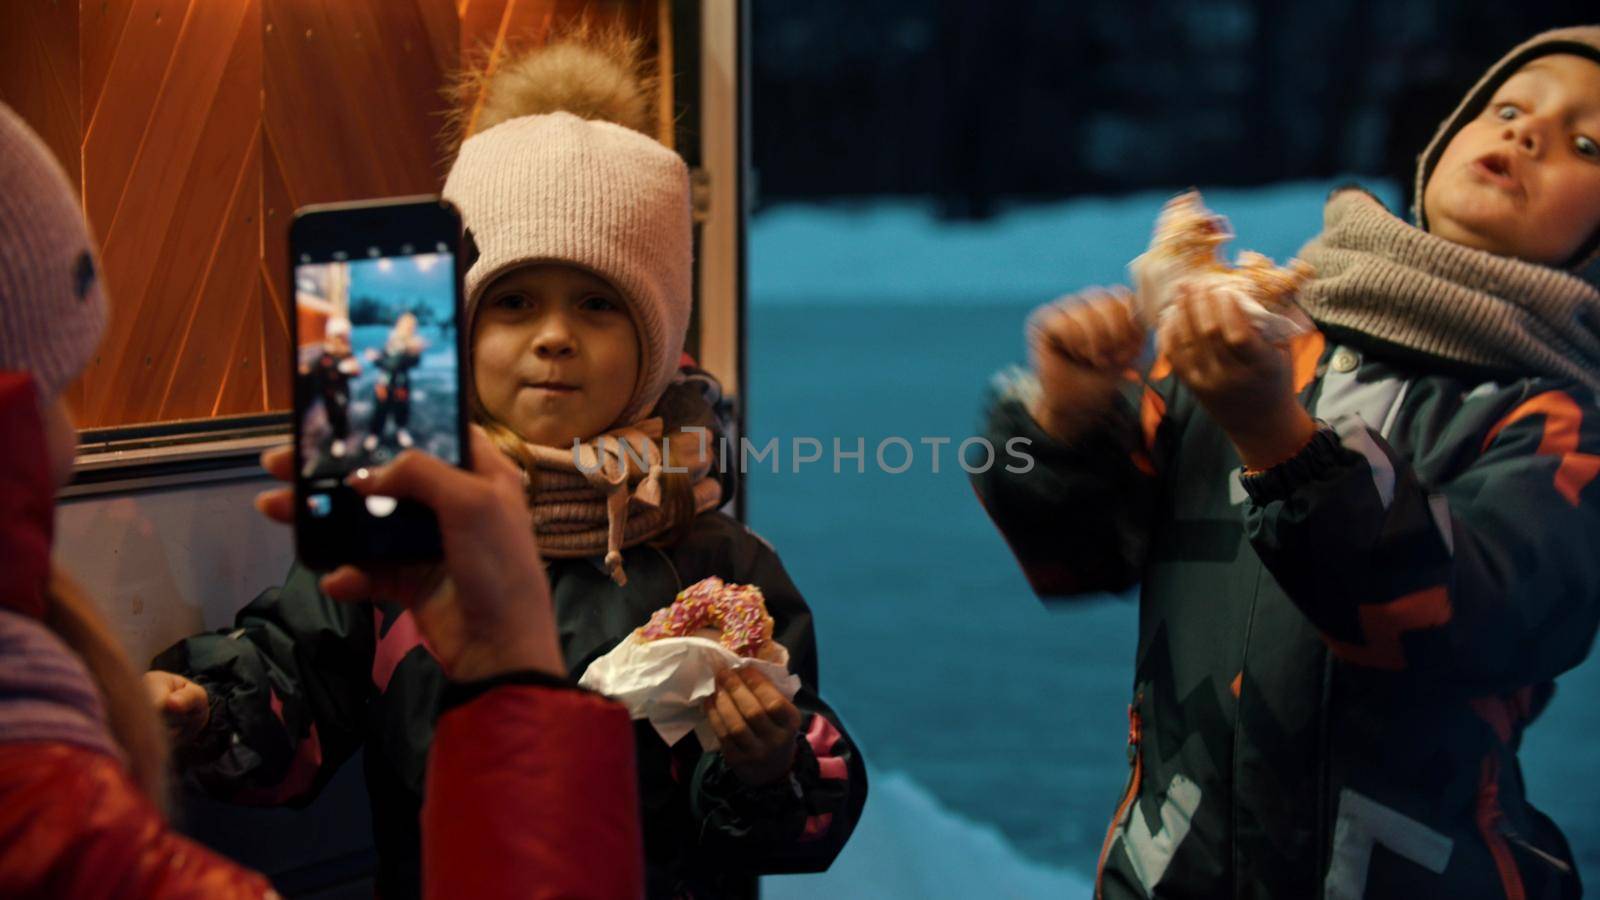 A woman mother taking photos of her children outdoors in winter. Mid shot